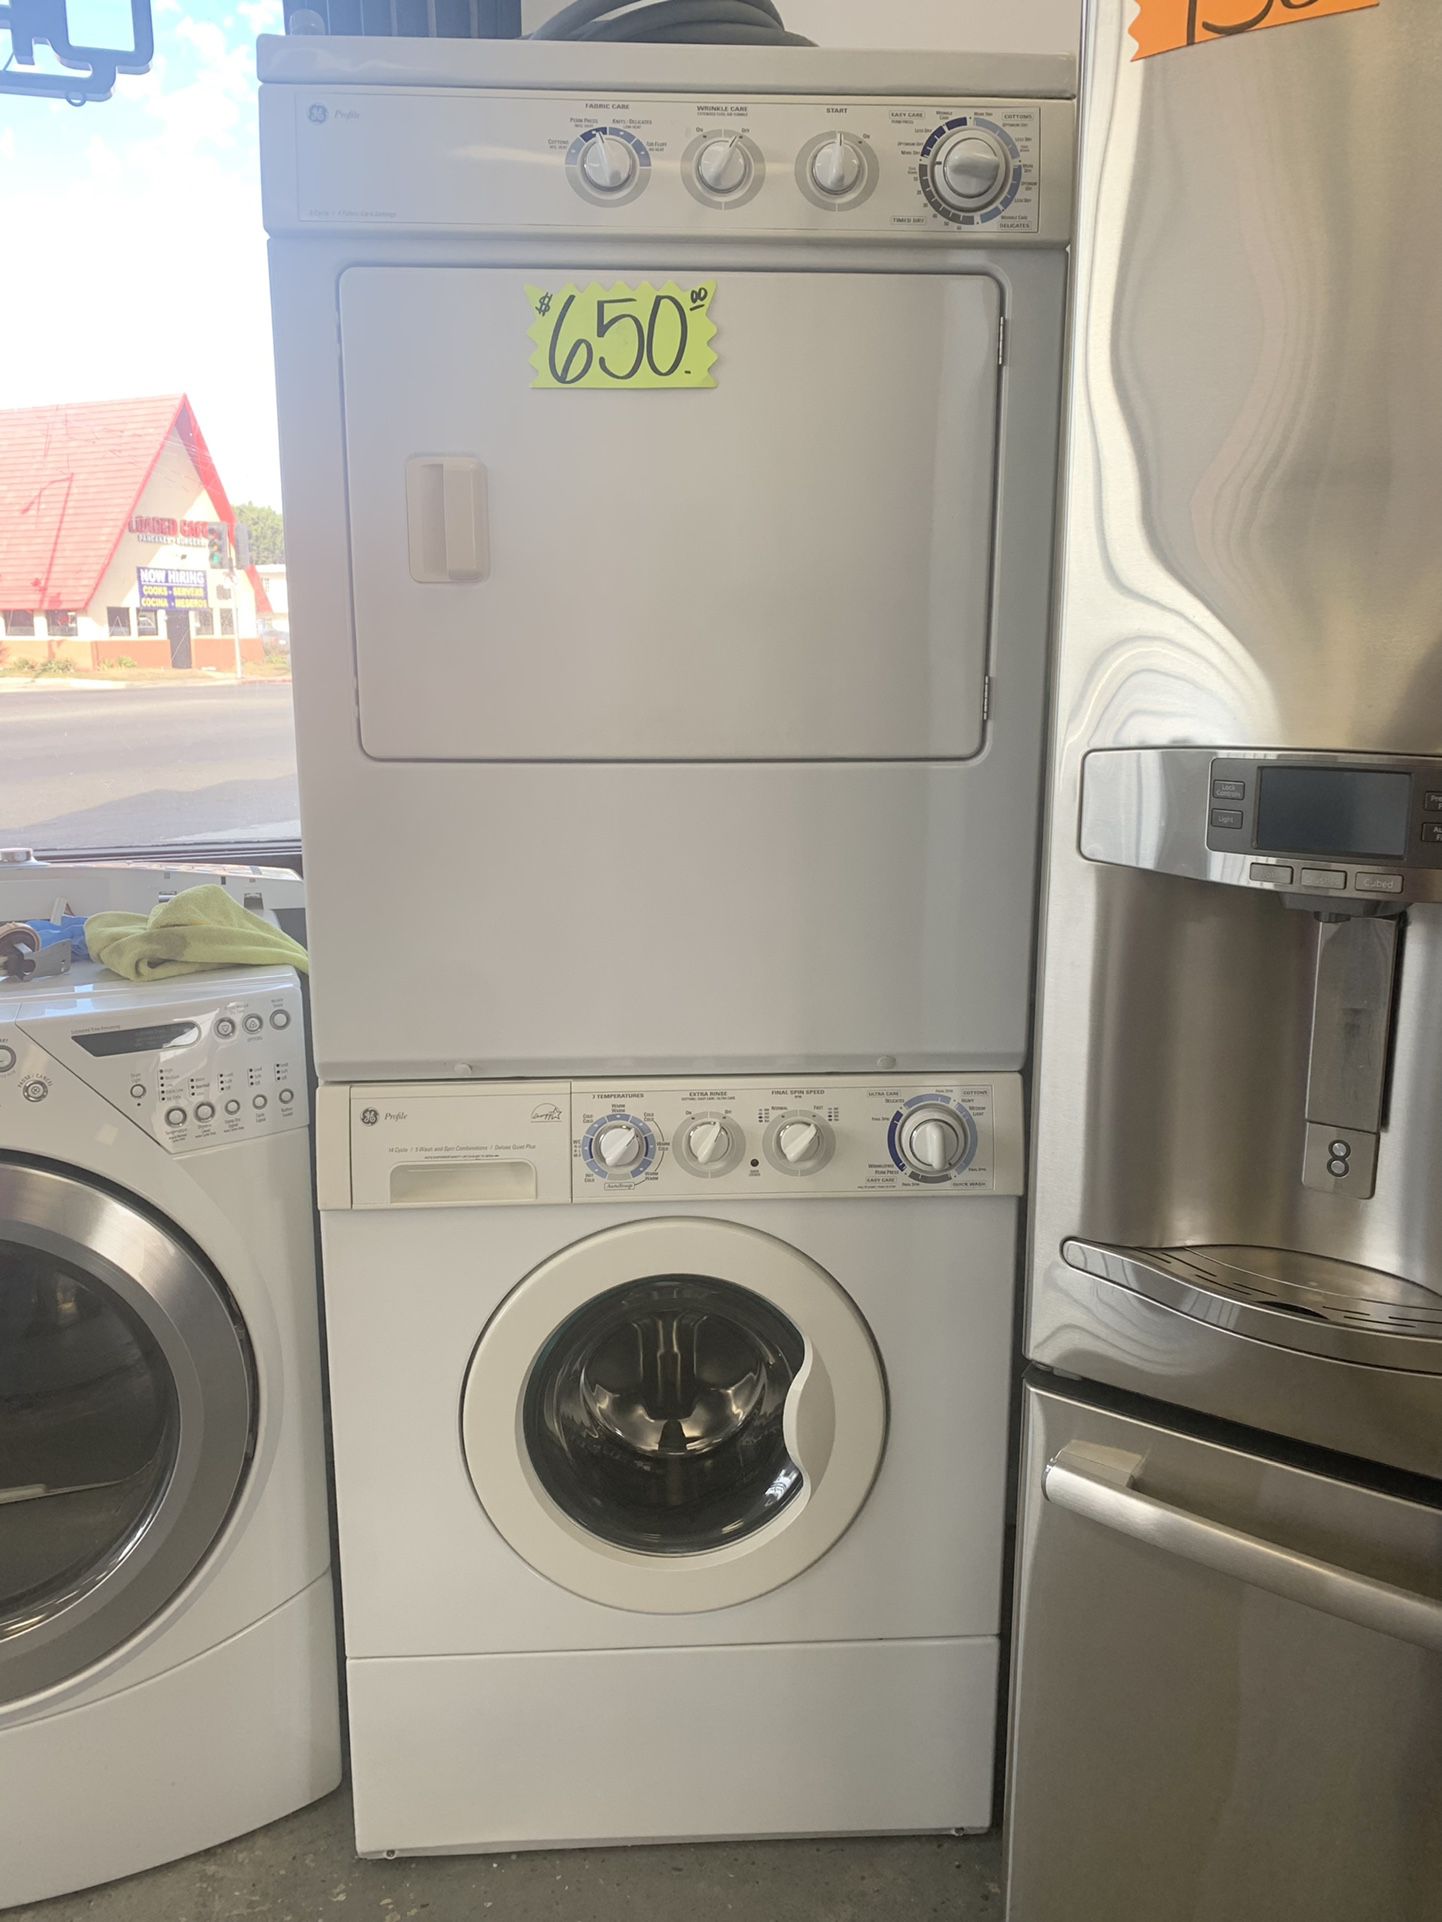 GE washer and gas dryer